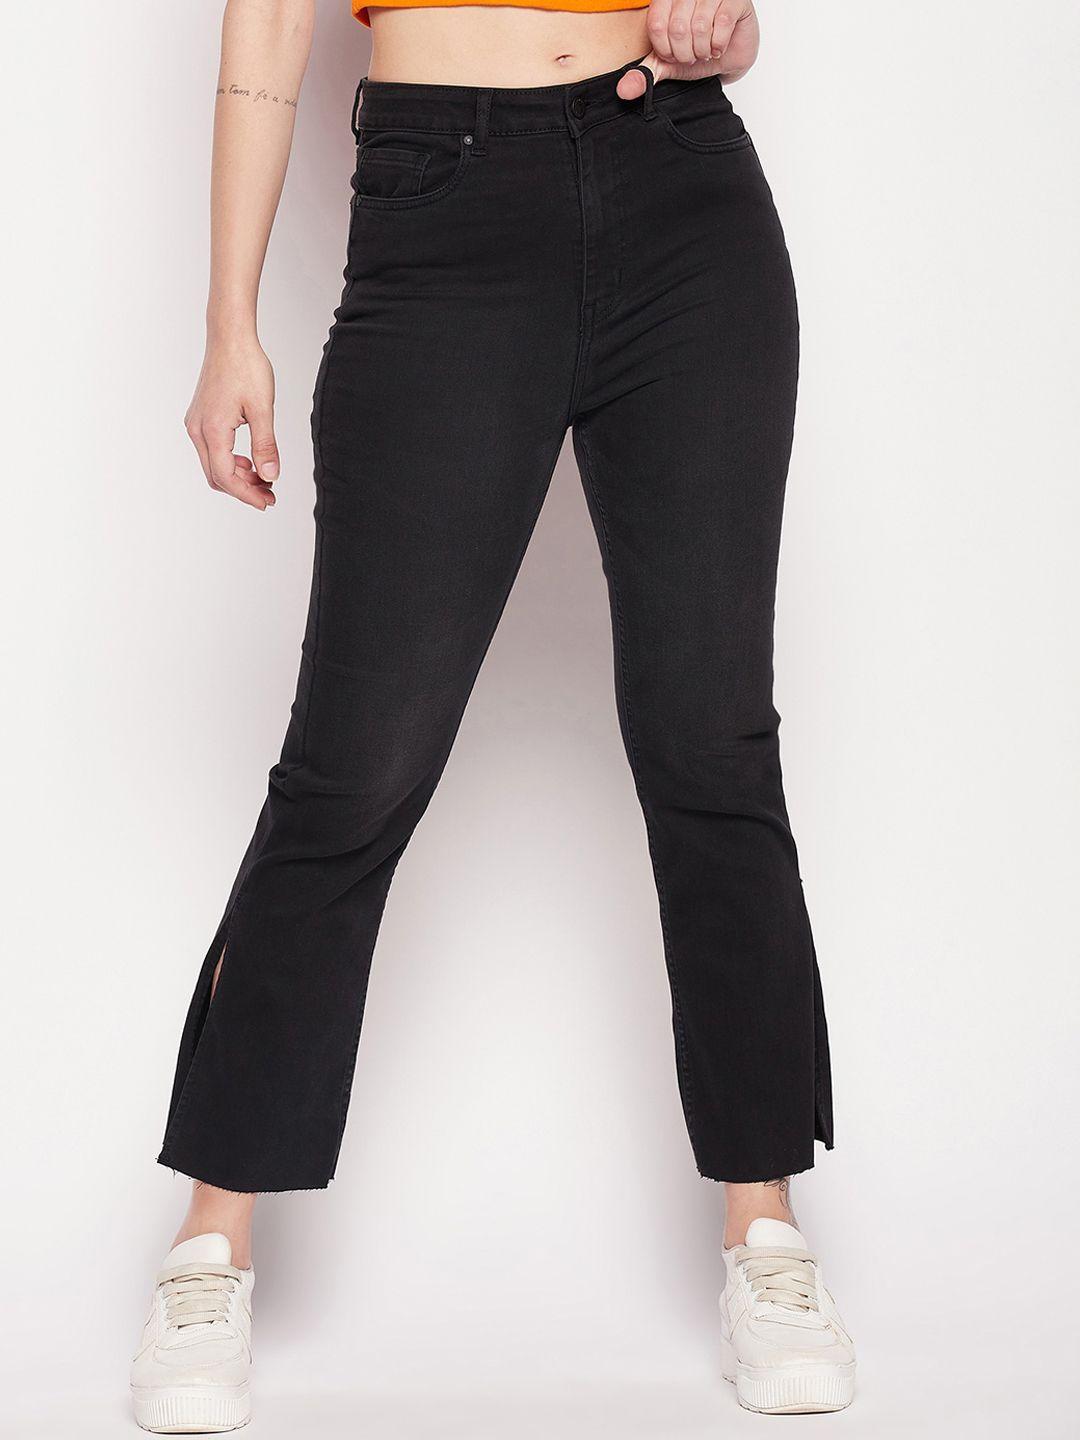 madame-women-flared-mid-rise-cotton-jeans